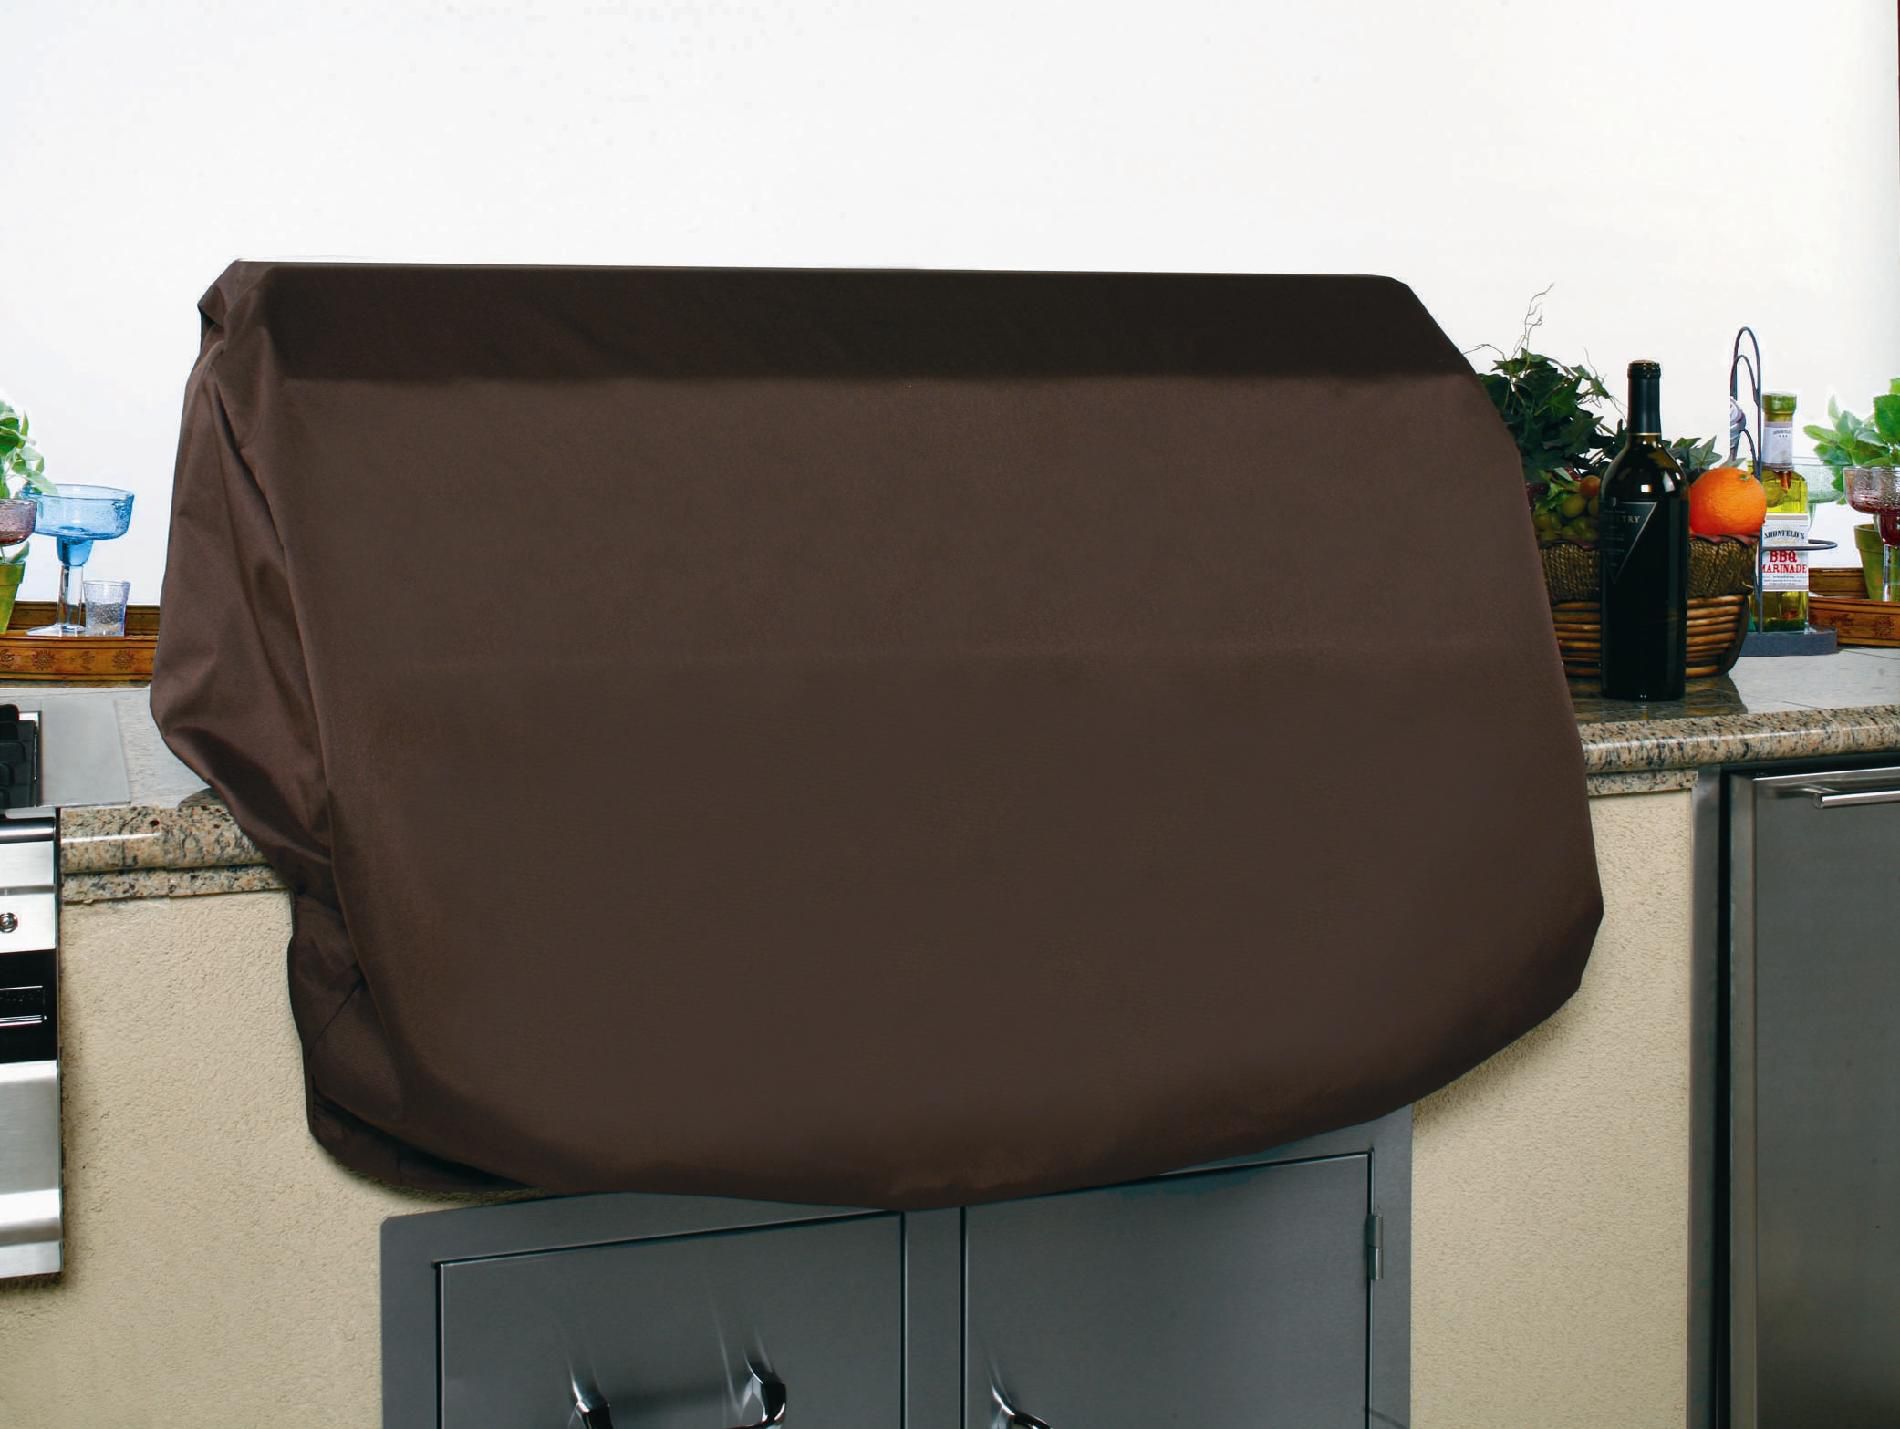 44" Grill Top Cover - Chocolate Brown